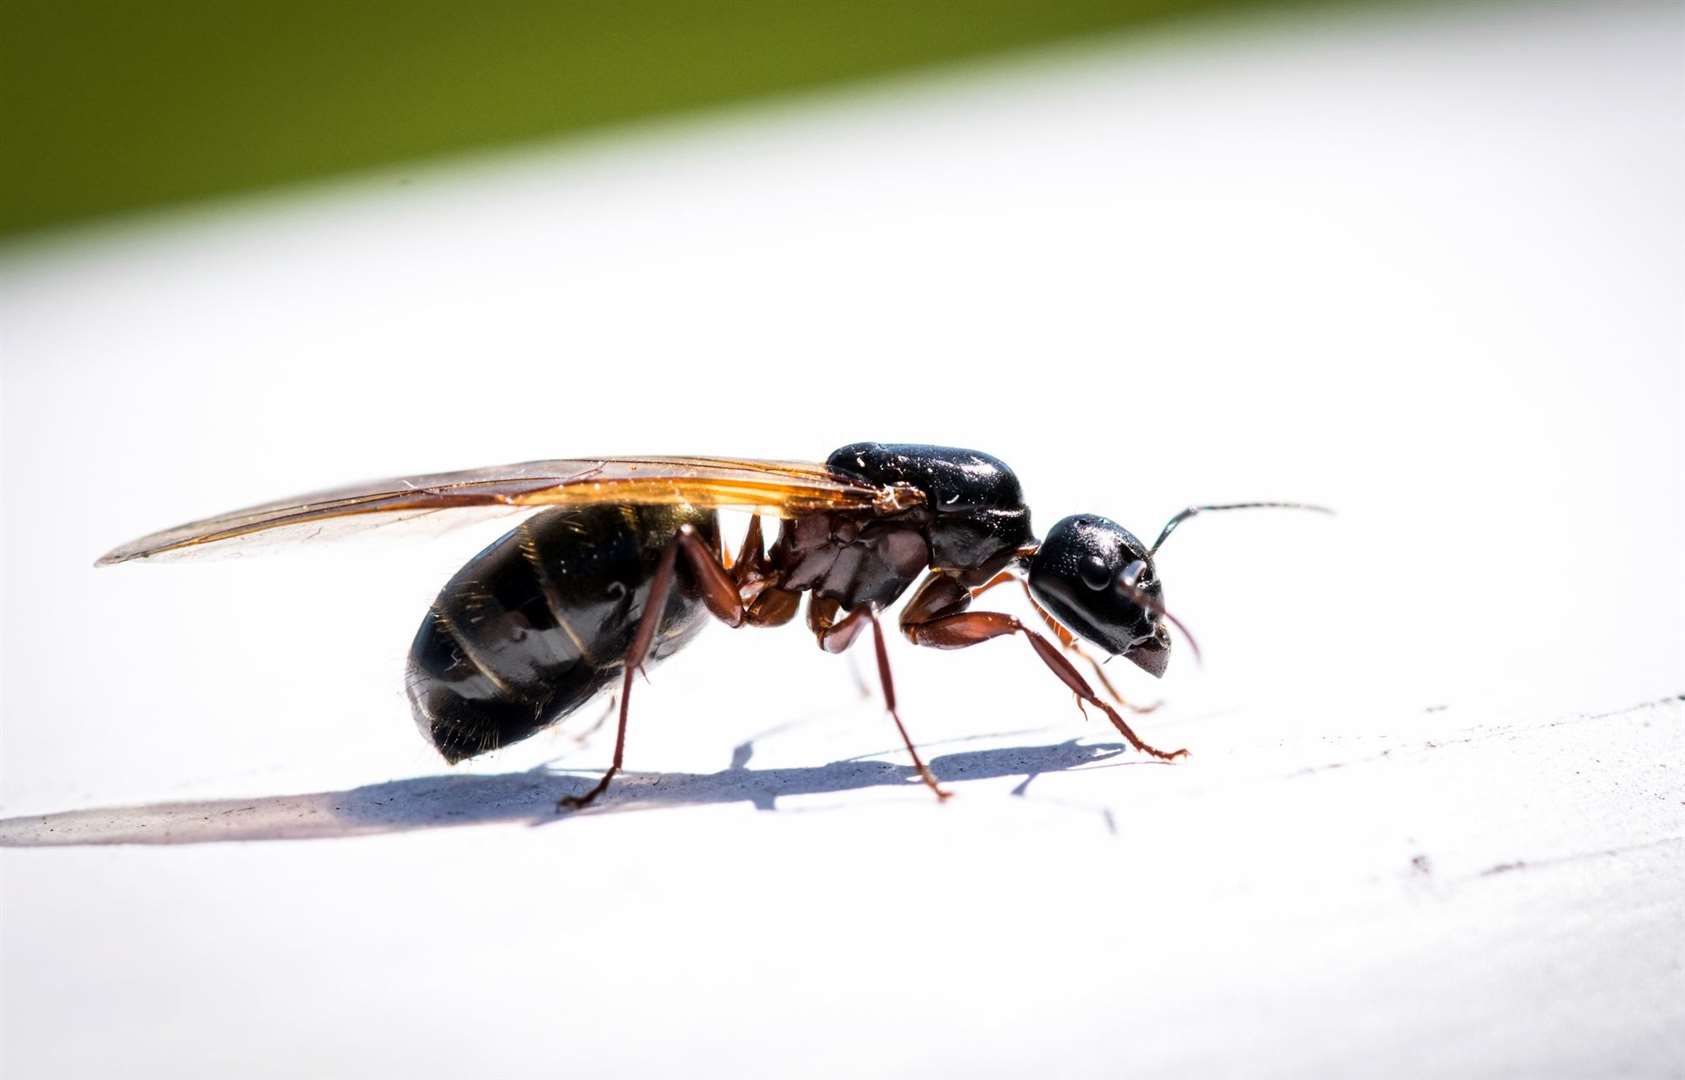 Flying ants could arrive in bumper swarms this year. Image: iStock.